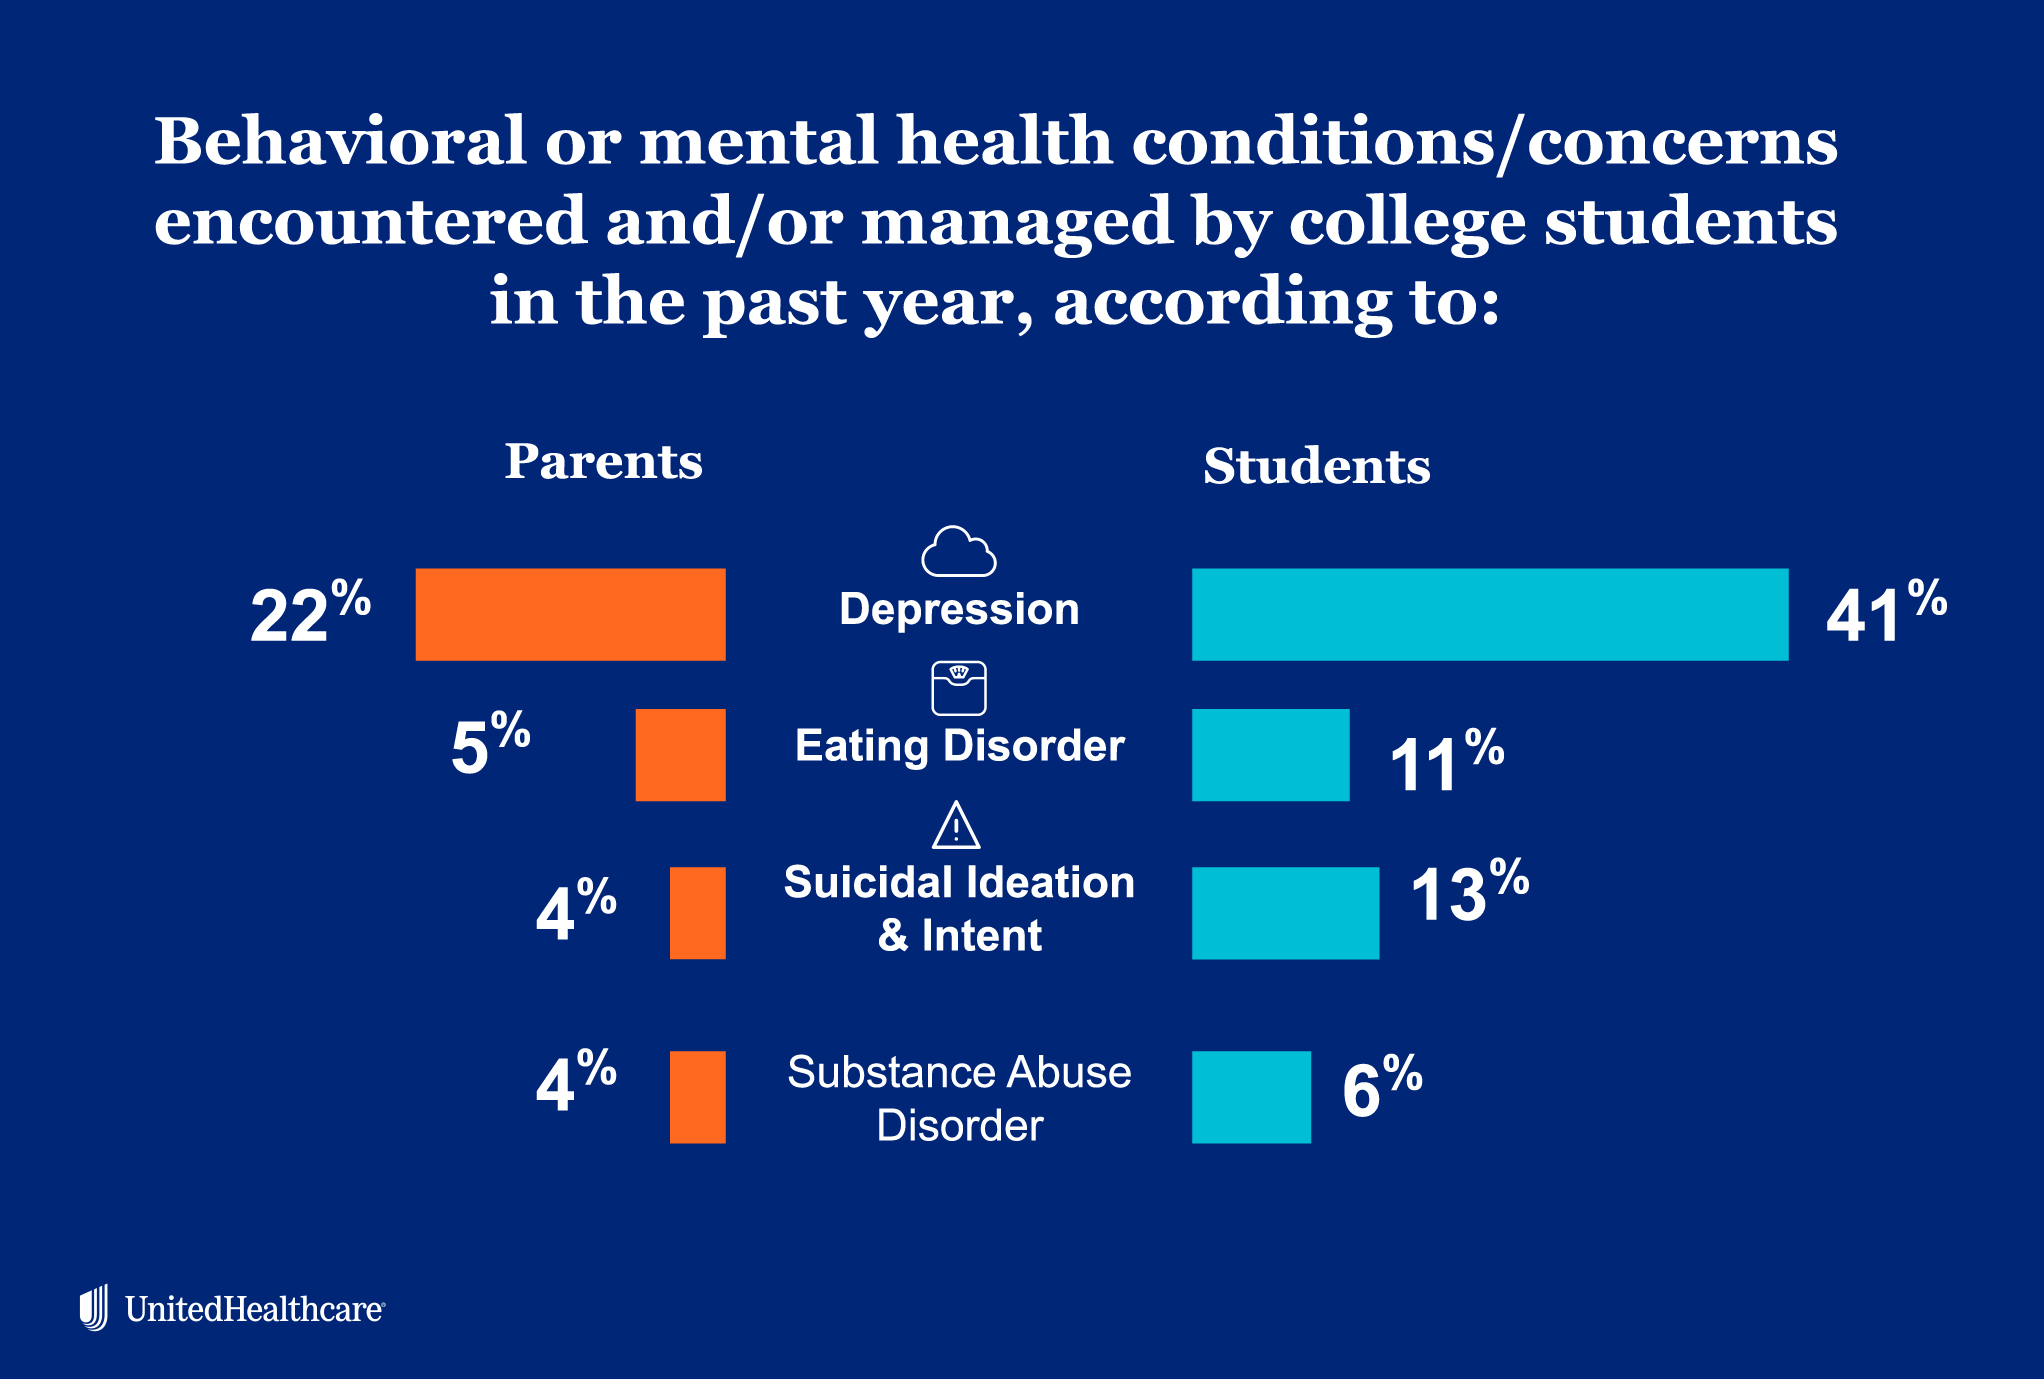 Infographic showing the comparison of reported conditions and concerns by college students vs parents